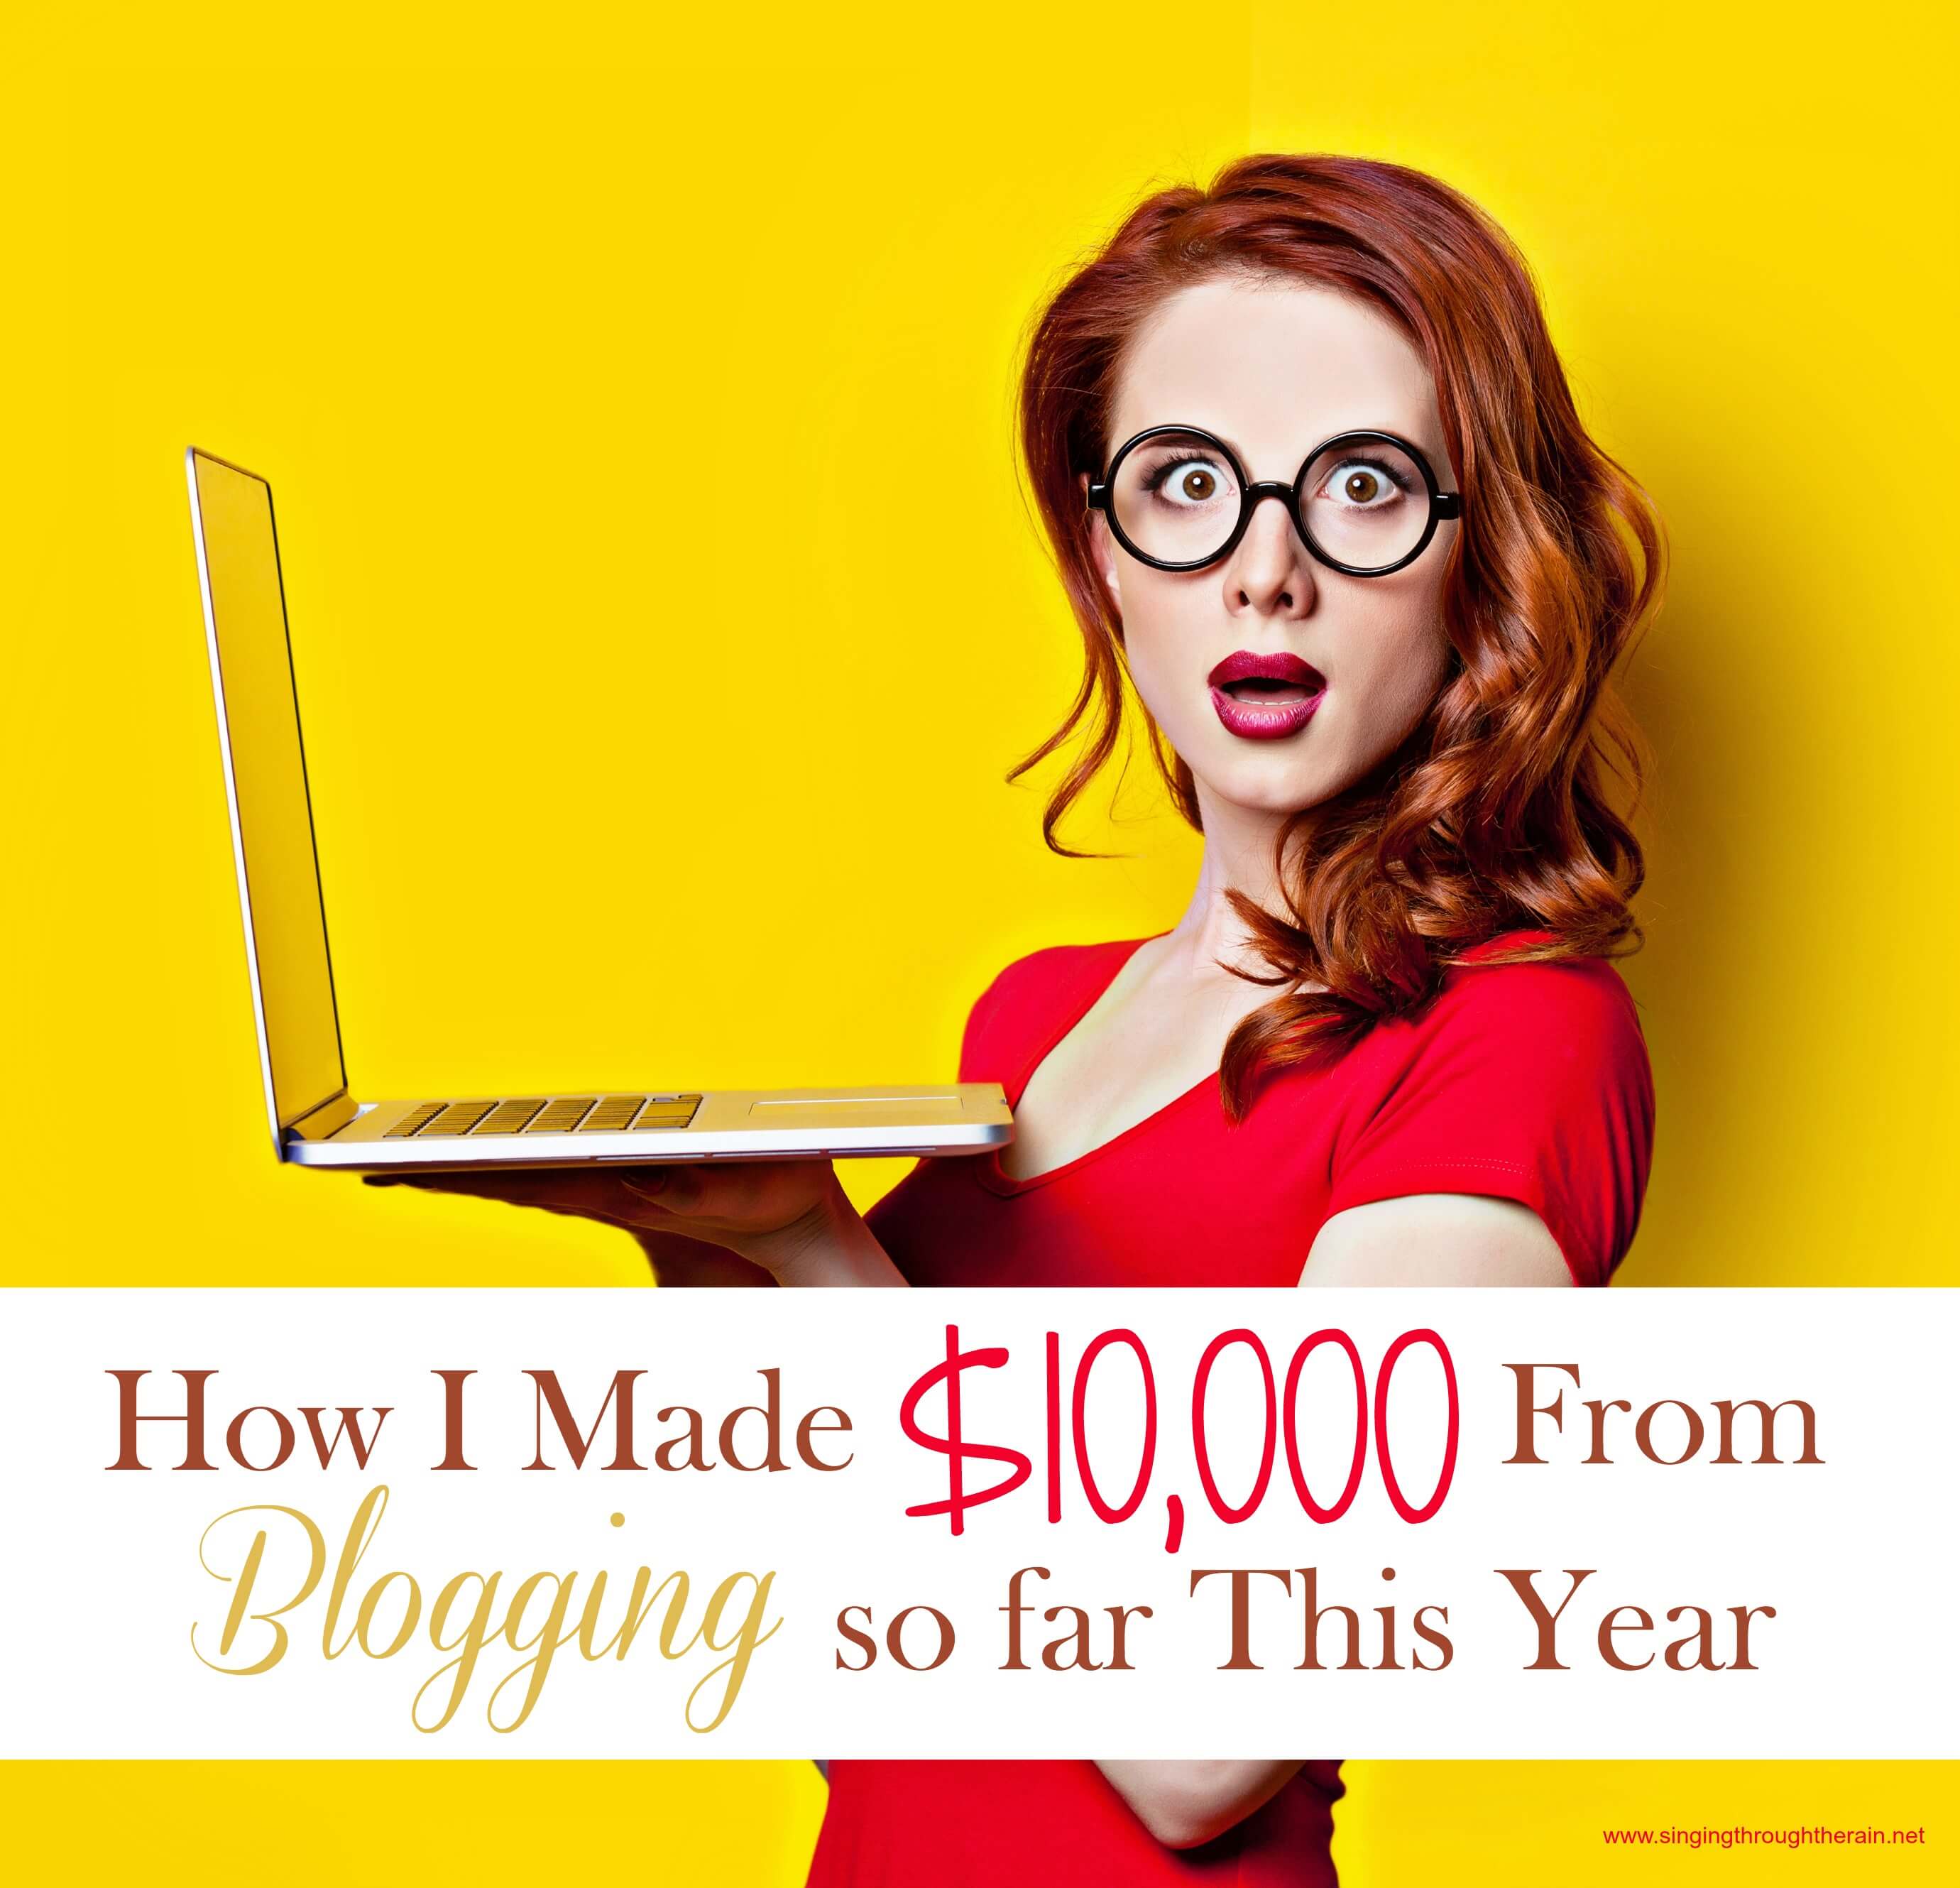 How I Made $10,000 From Blogging so far This Year